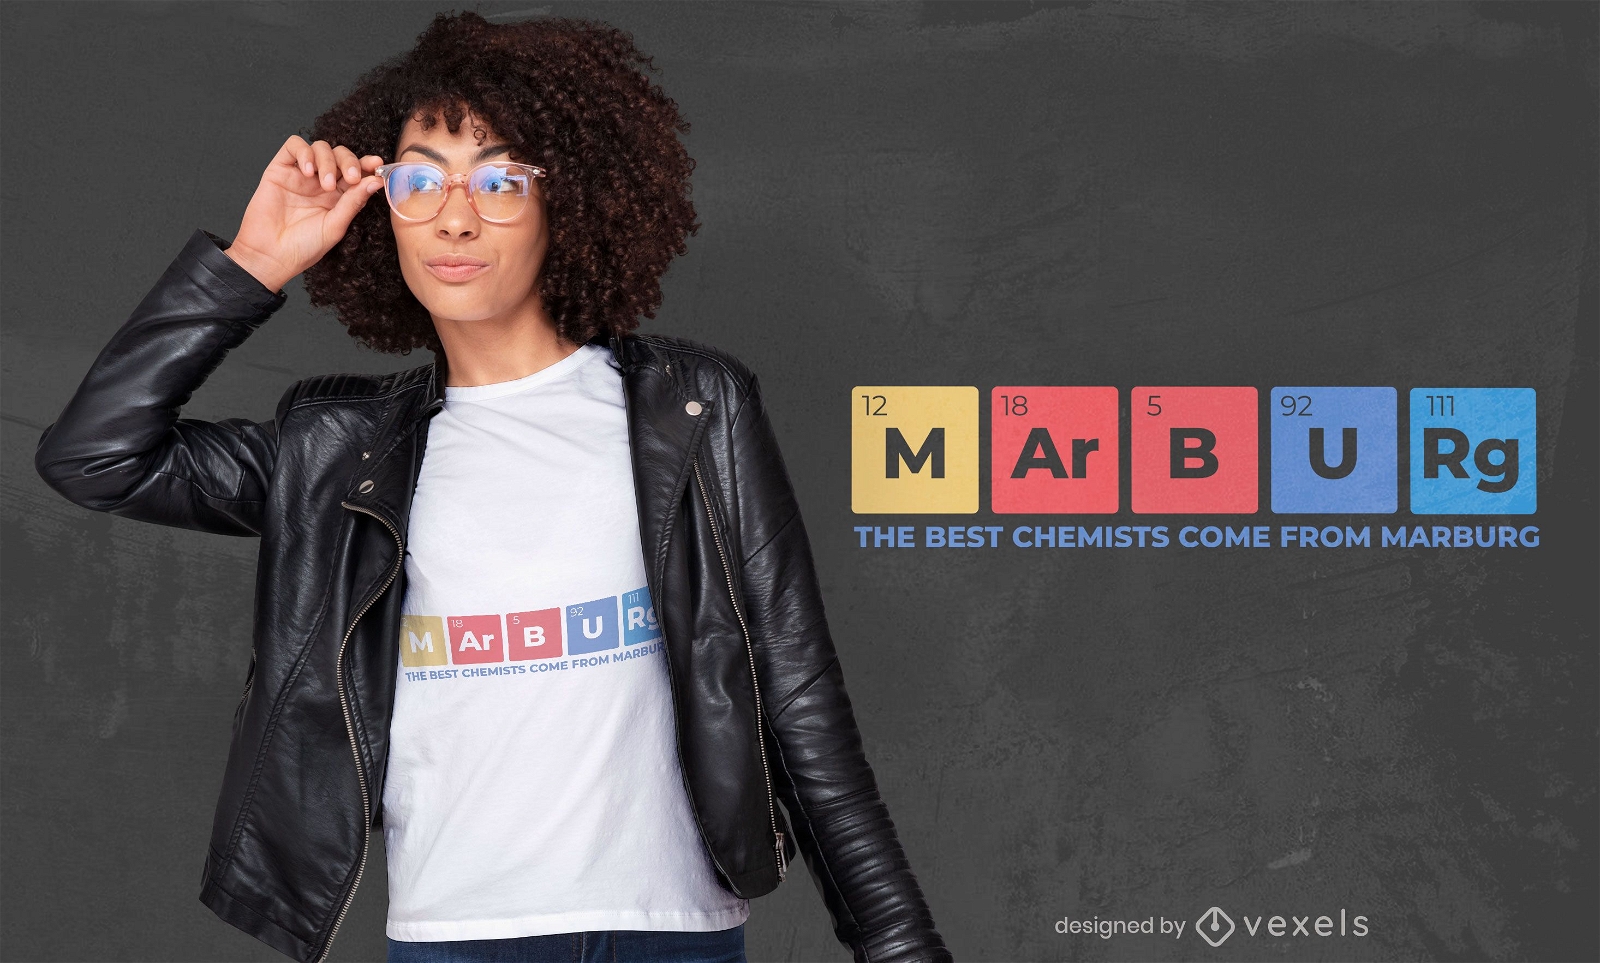 Chemists from marburg t-shirt design